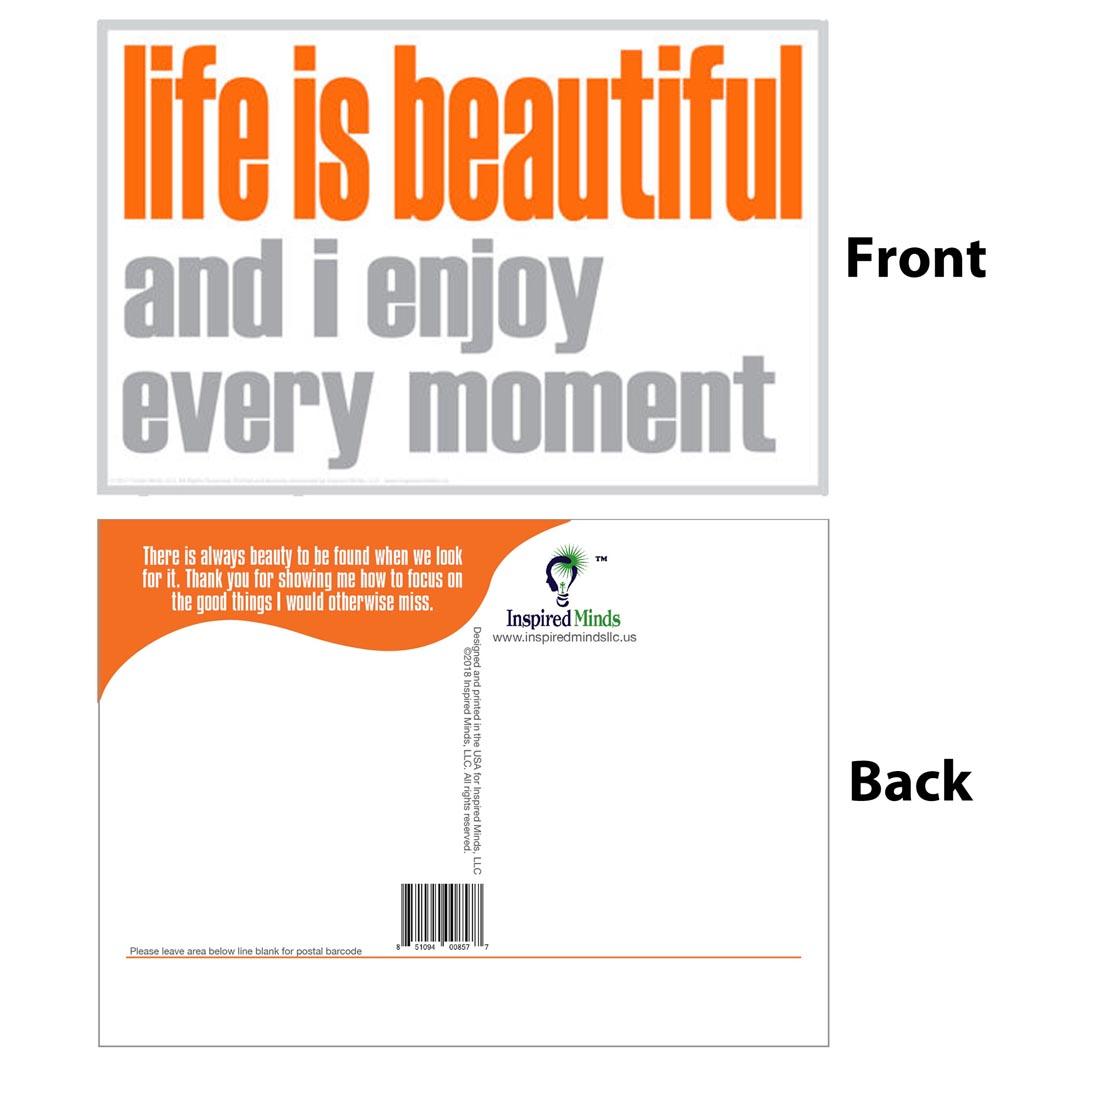 Front and back of the Life Is Beautiful And I Enjoy Every Moment Postcard